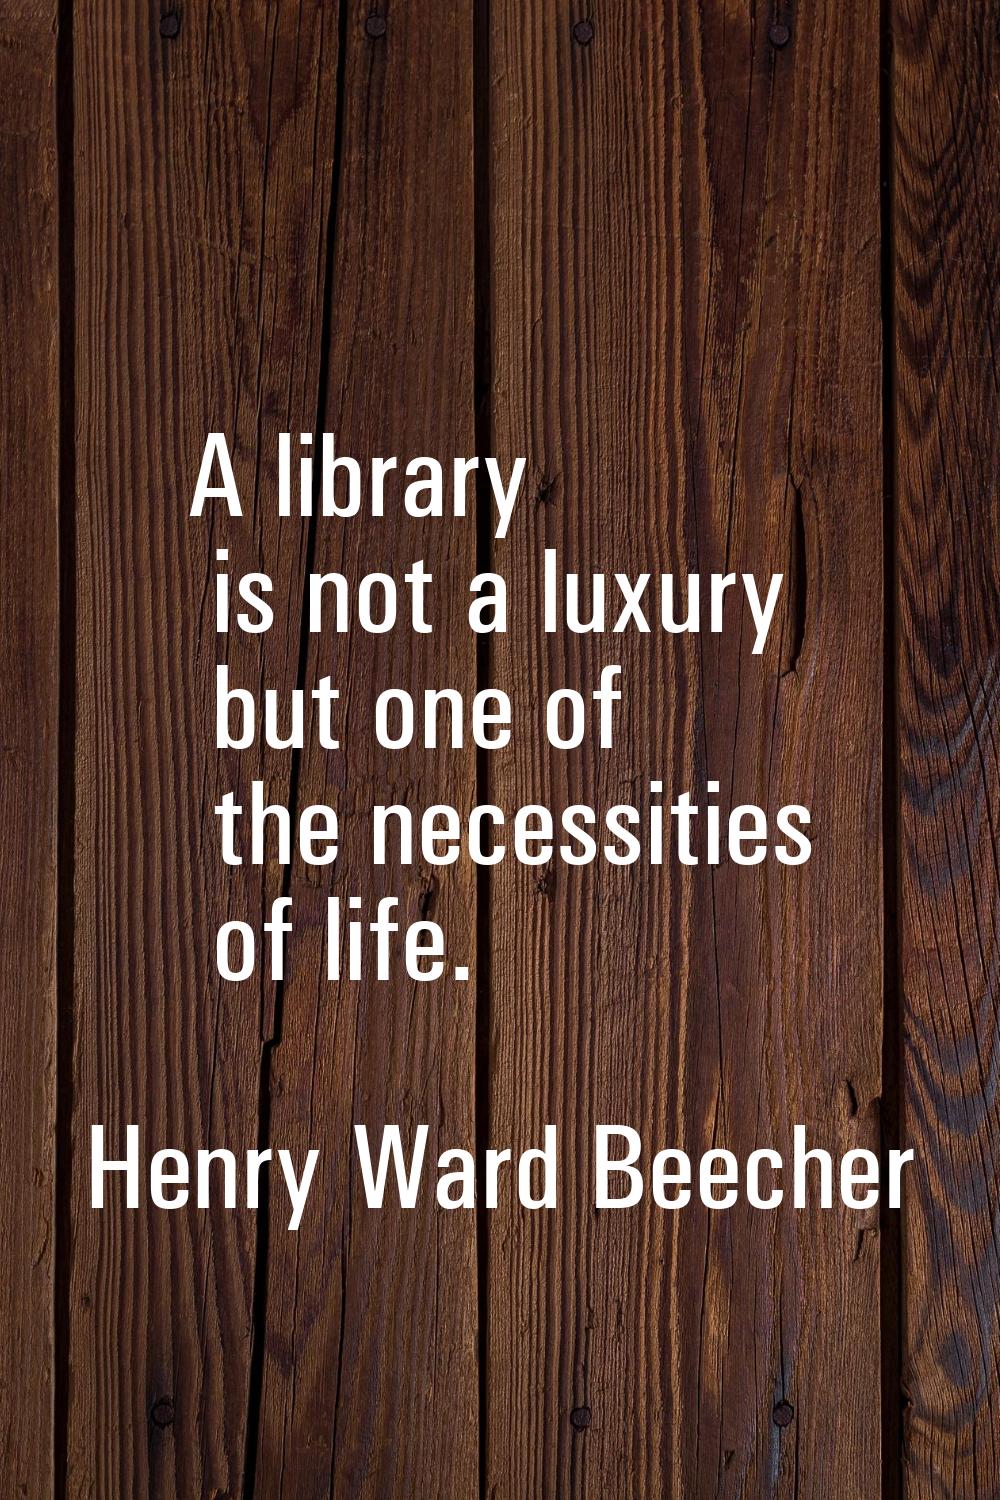 A library is not a luxury but one of the necessities of life.